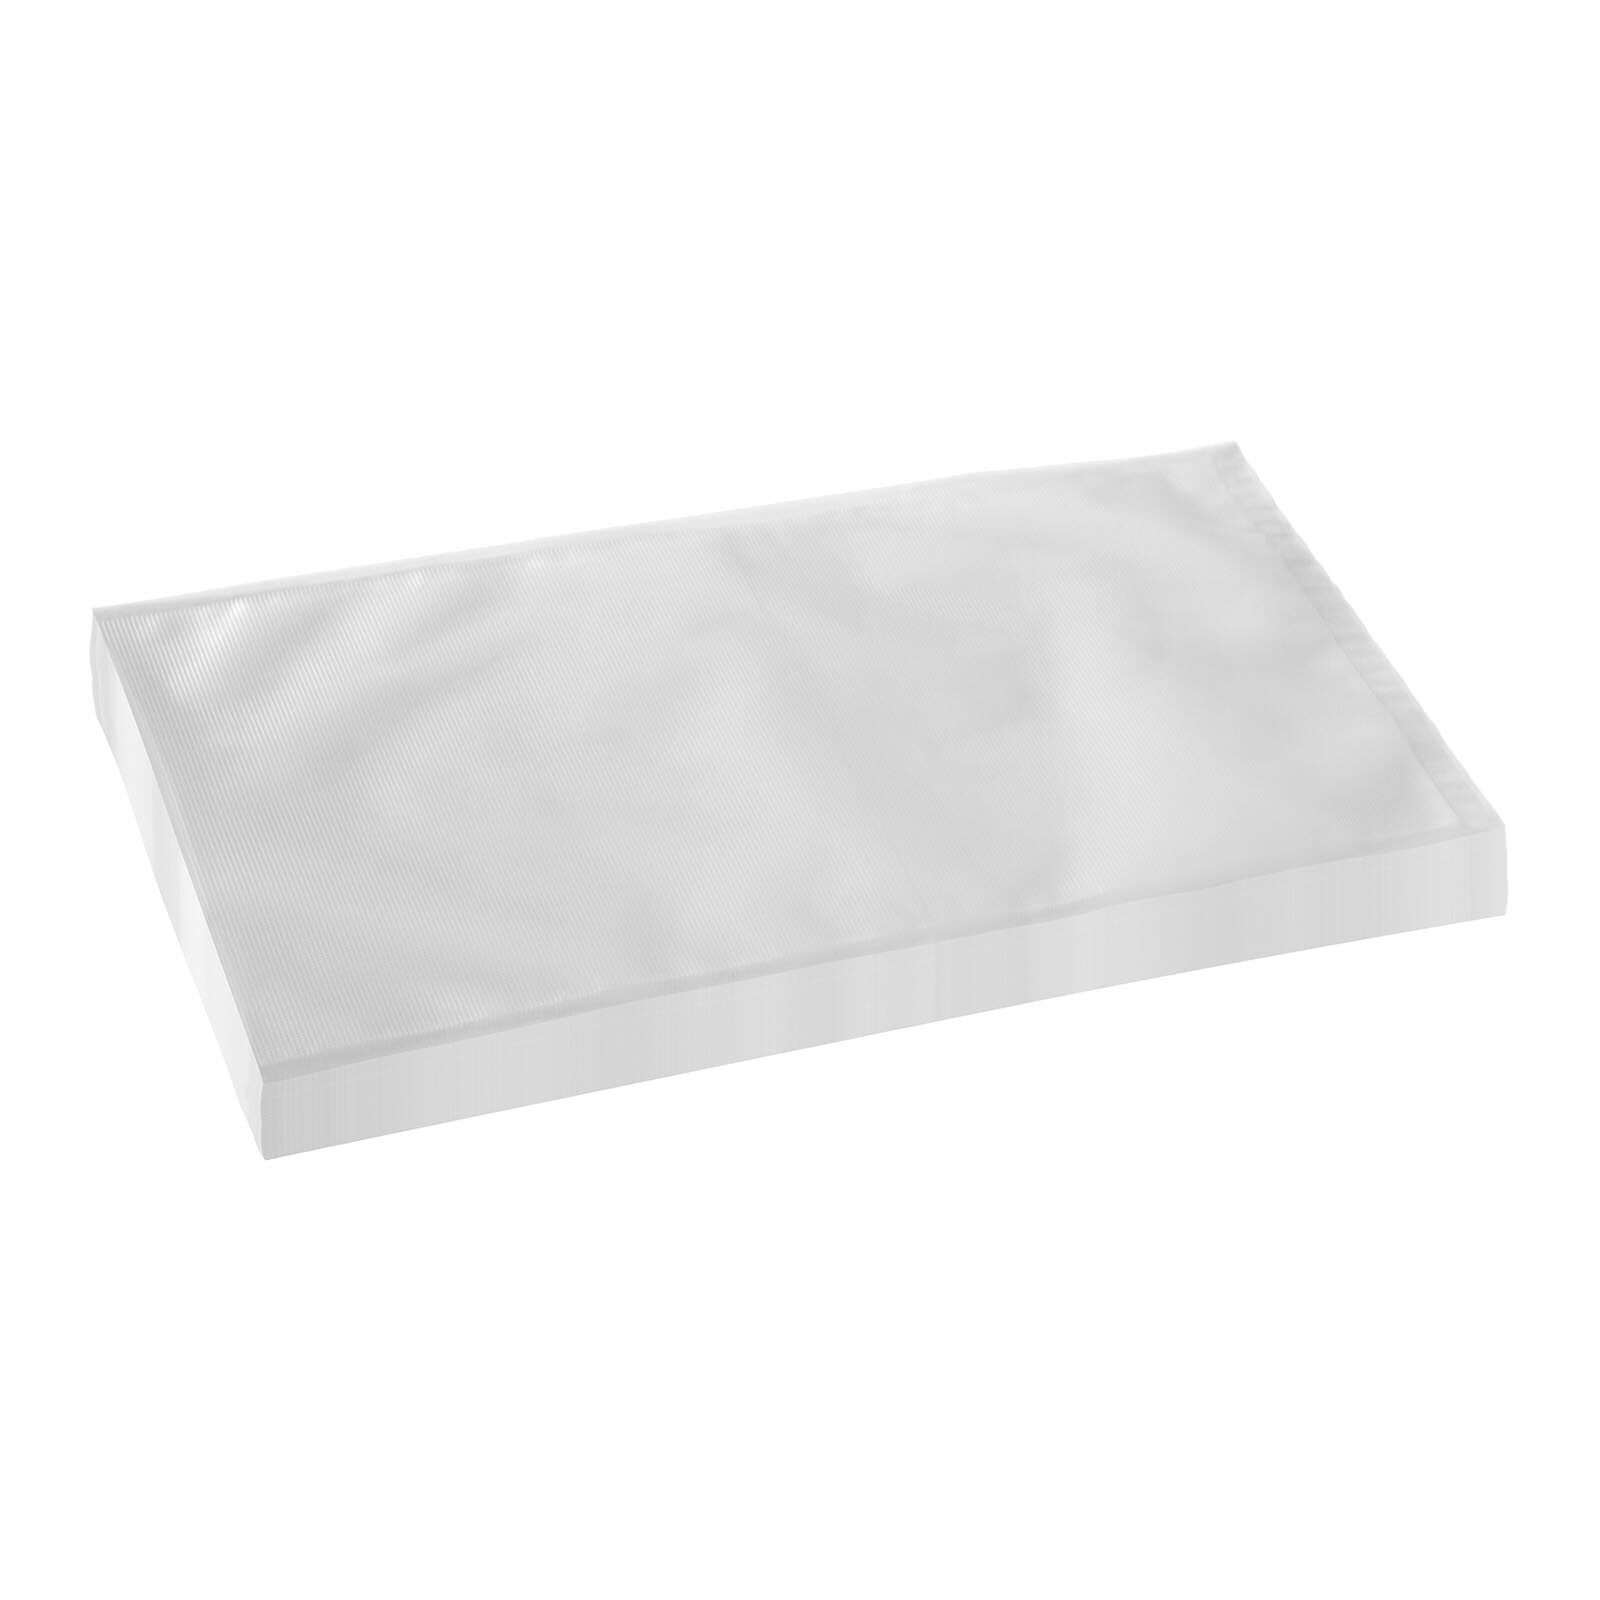 Royal Catering Vacuum Packaging Bags - 30 x 20 cm - 100 pieces RCVB-20X30-100